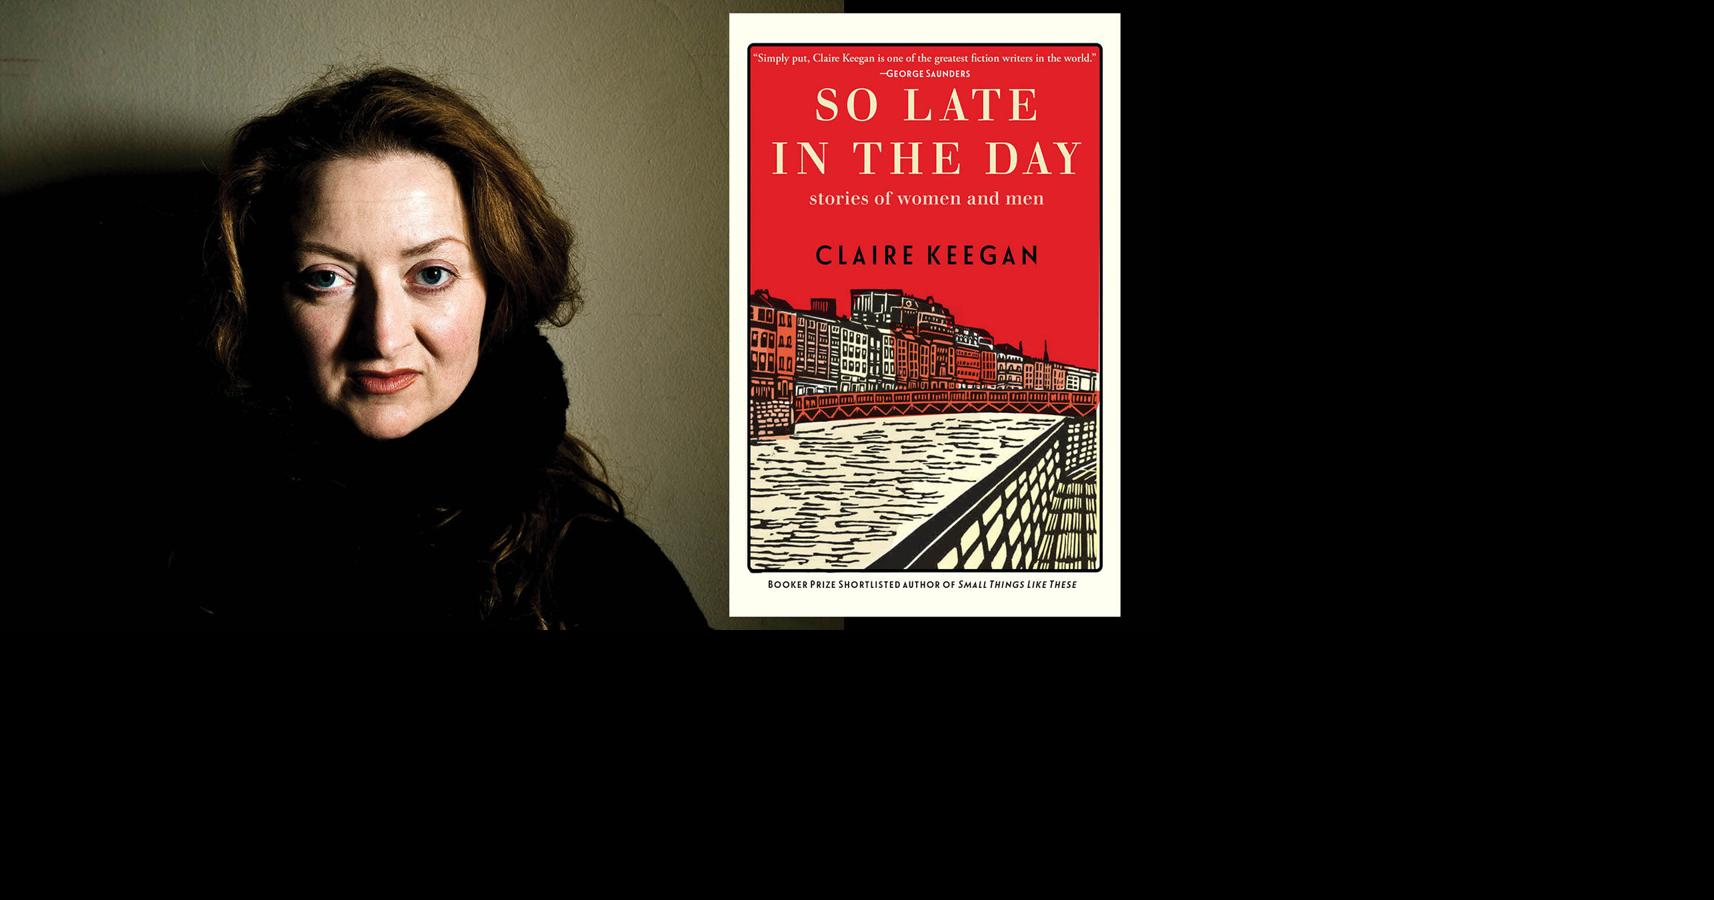 So Late in the Day: Stories of Women and Men